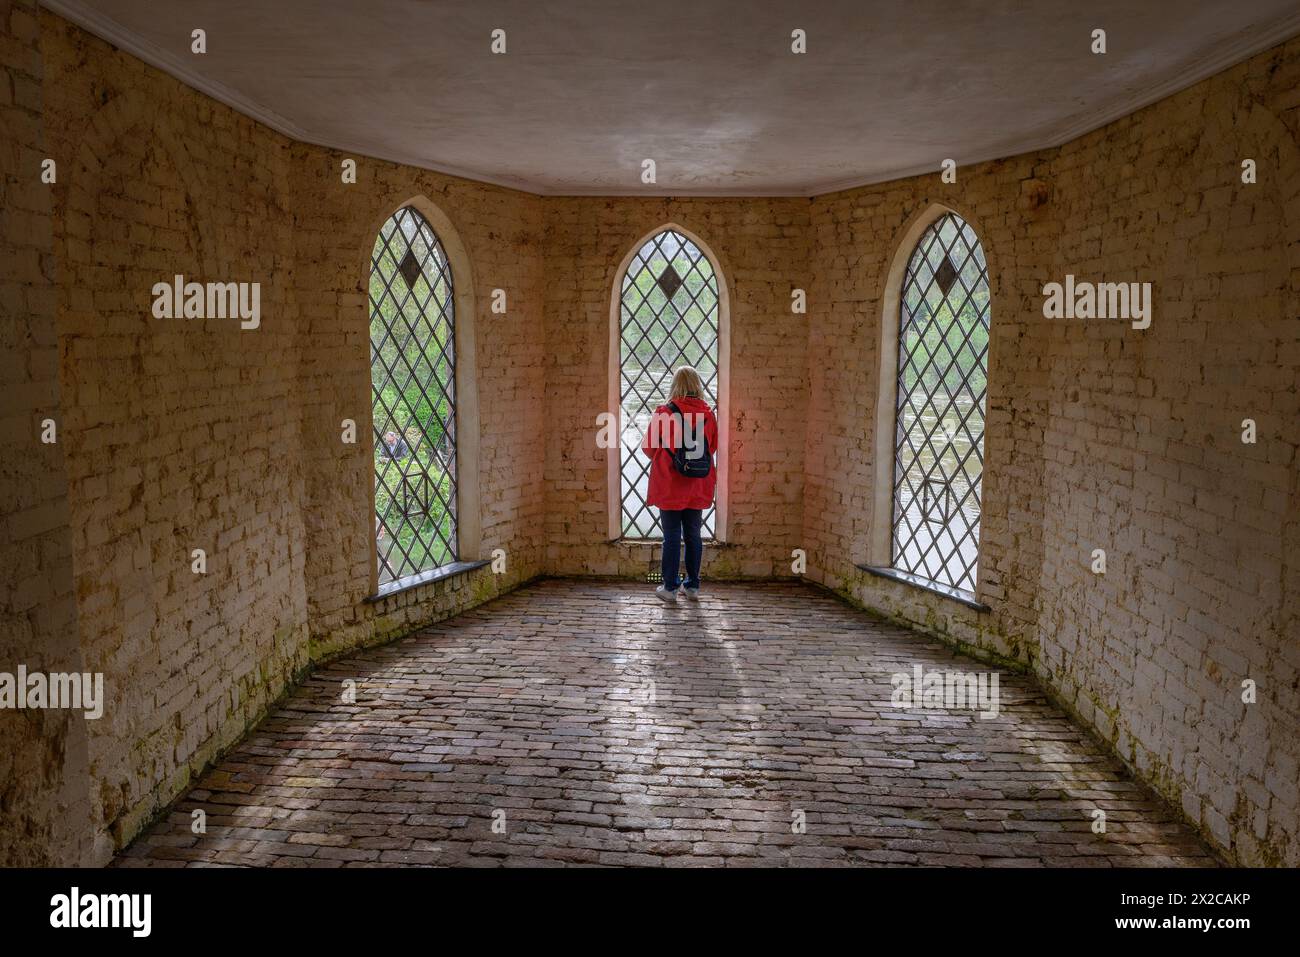 Woman inside the Museum of The Gorge looking out through metalled lattice windows, Ironbridge, Shropshire, UK Stock Photo